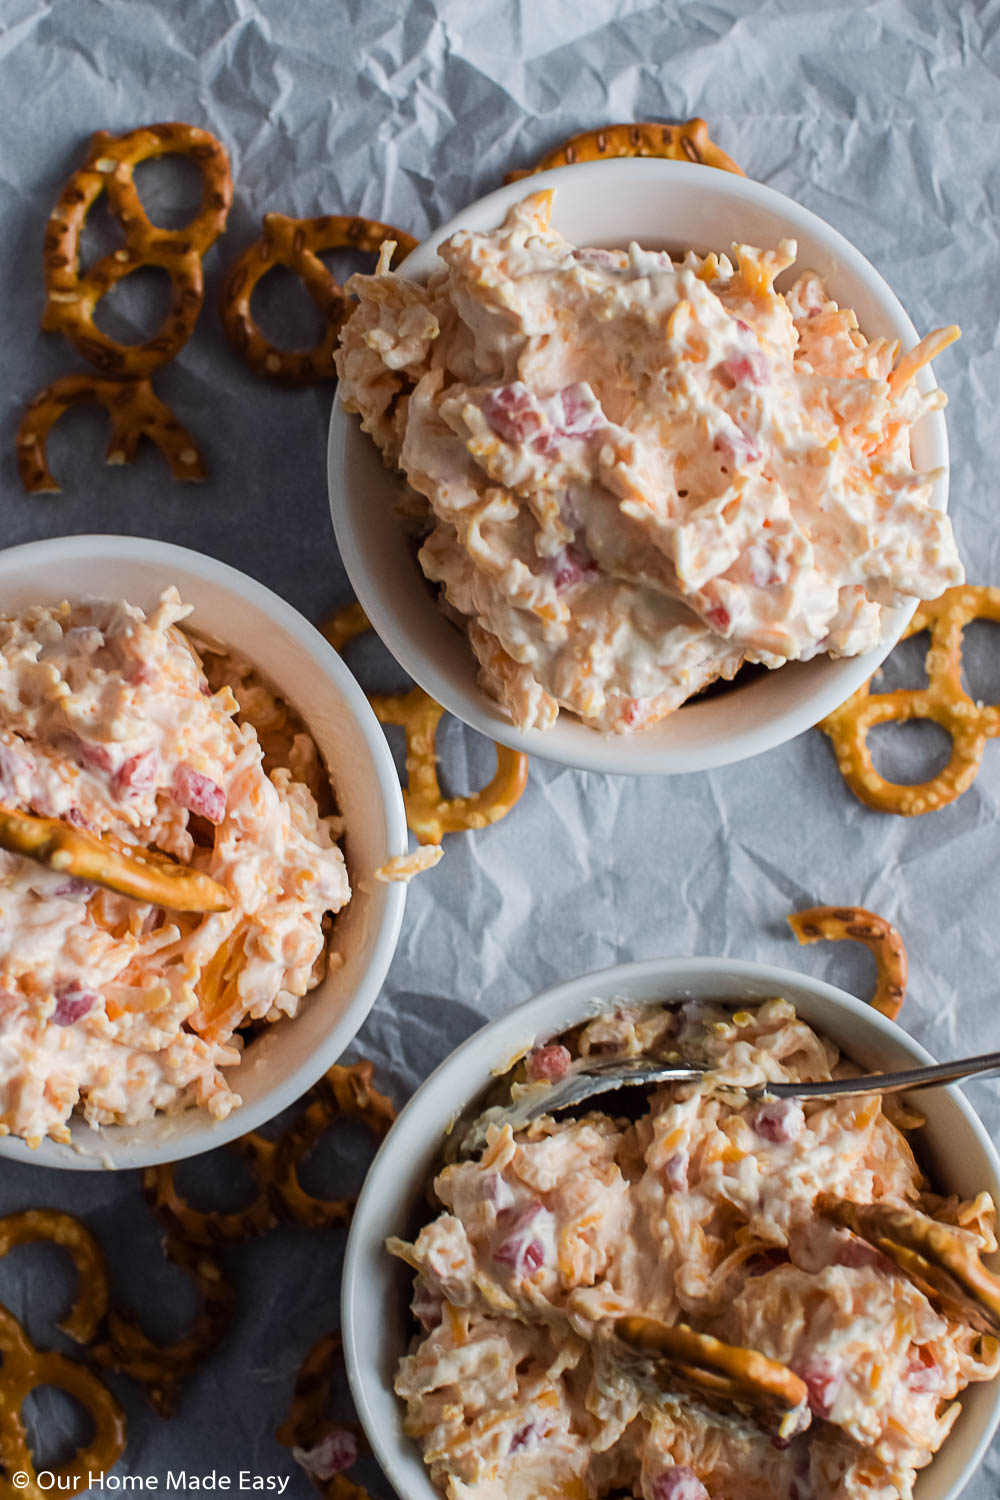 Serve this pimento cheese spread with pretzels or crackers for an easy and delicious party appetizer